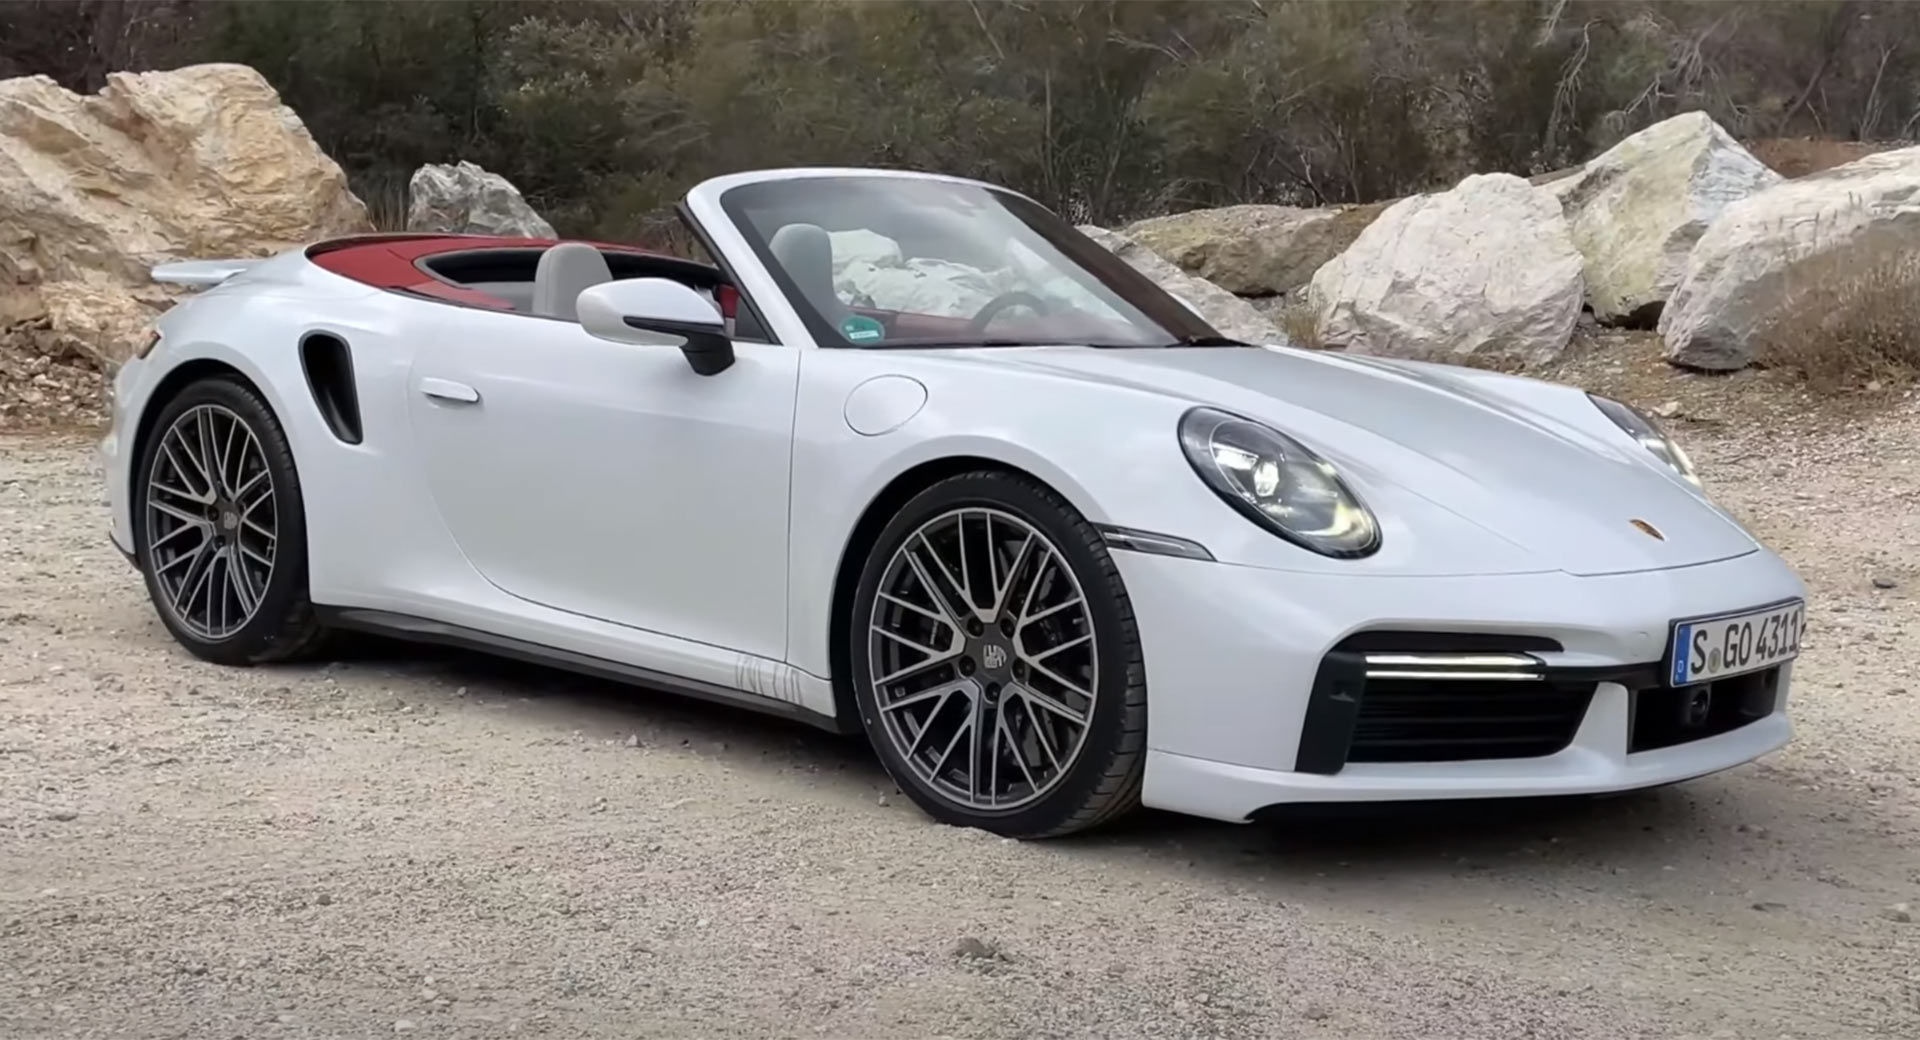 Porsche 911 Turbo Cabriolet Is So Good It Steps On Supercars’ Toes Auto Recent